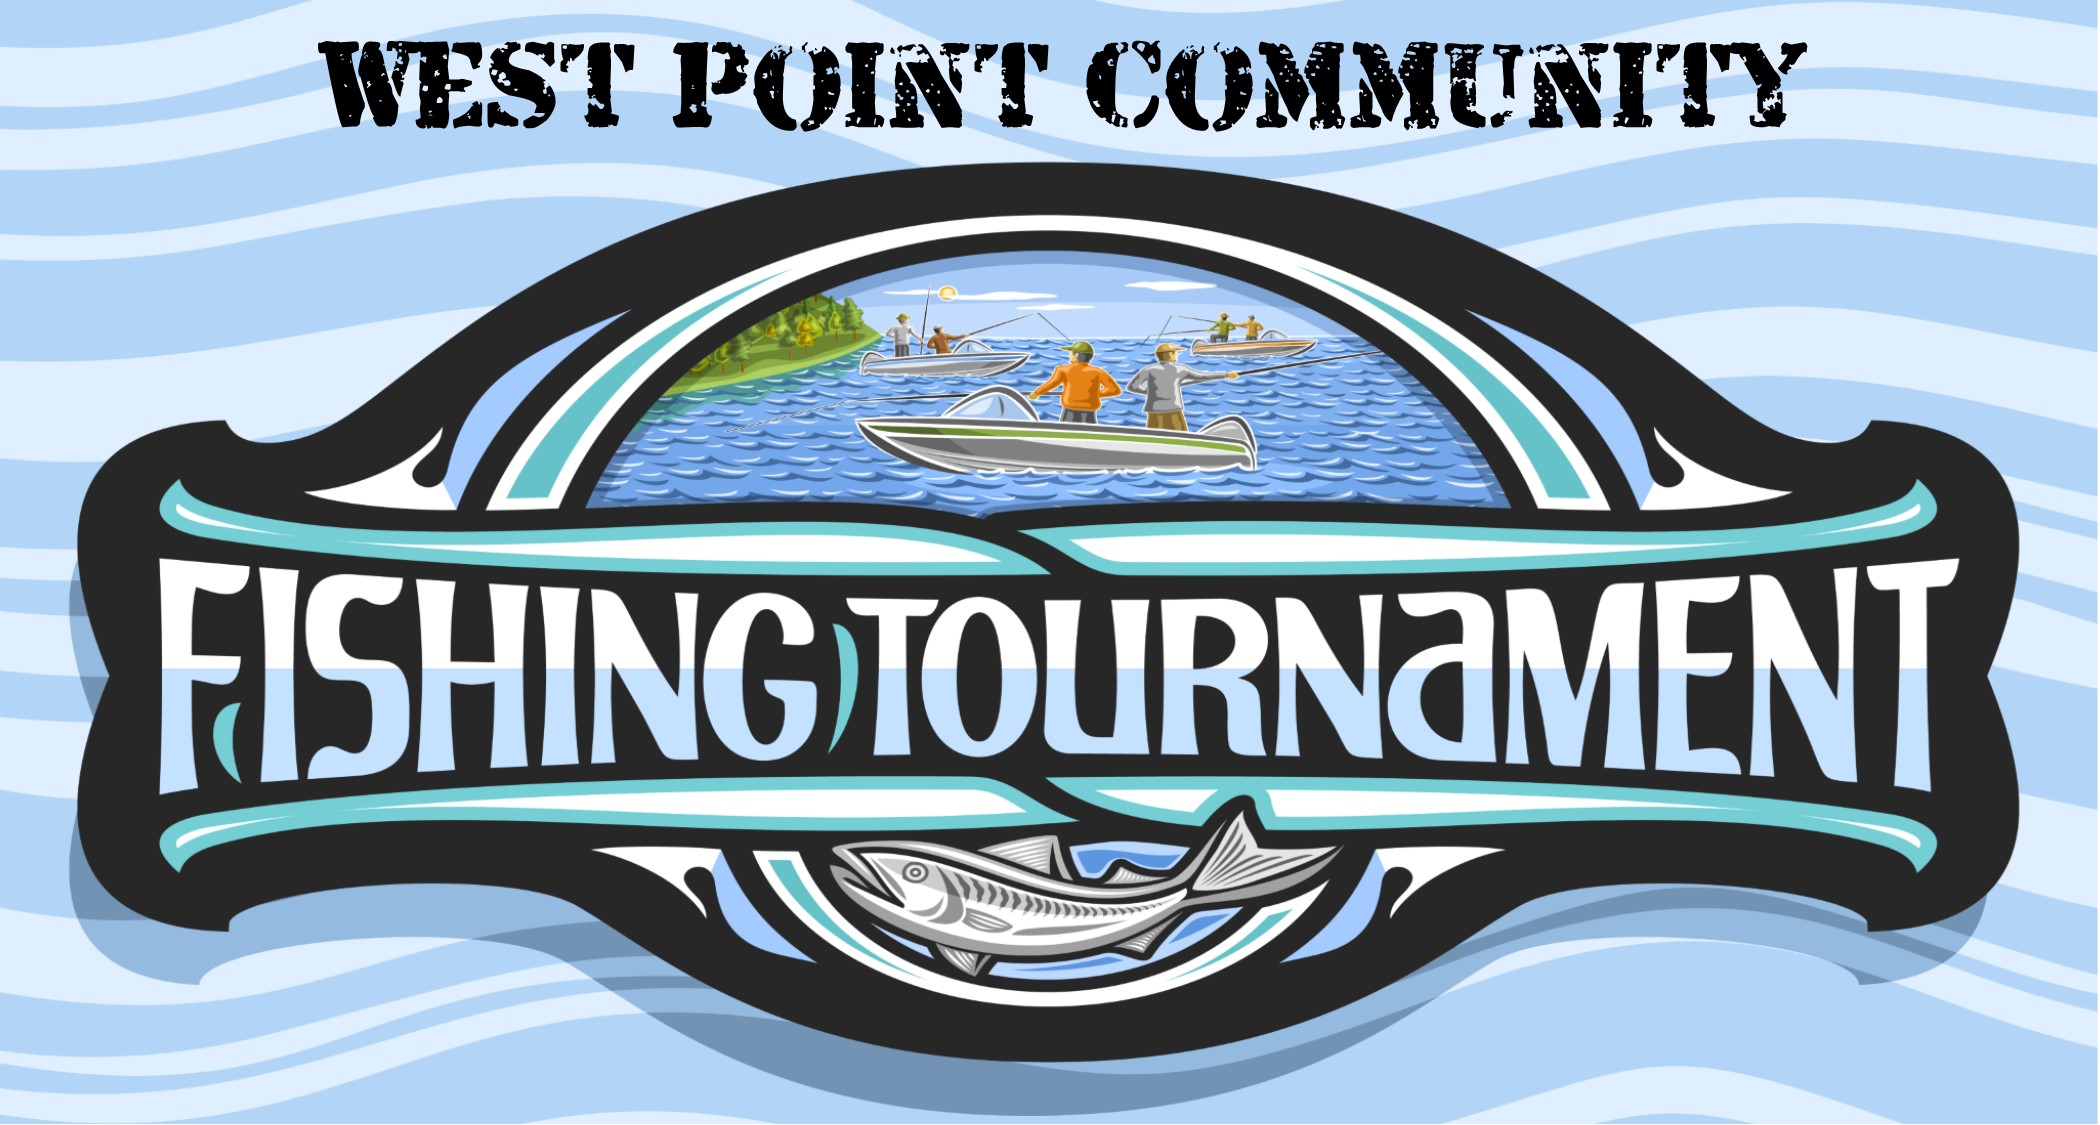 View Event :: West Point Fishing Tournament :: West Point :: US Army MWR